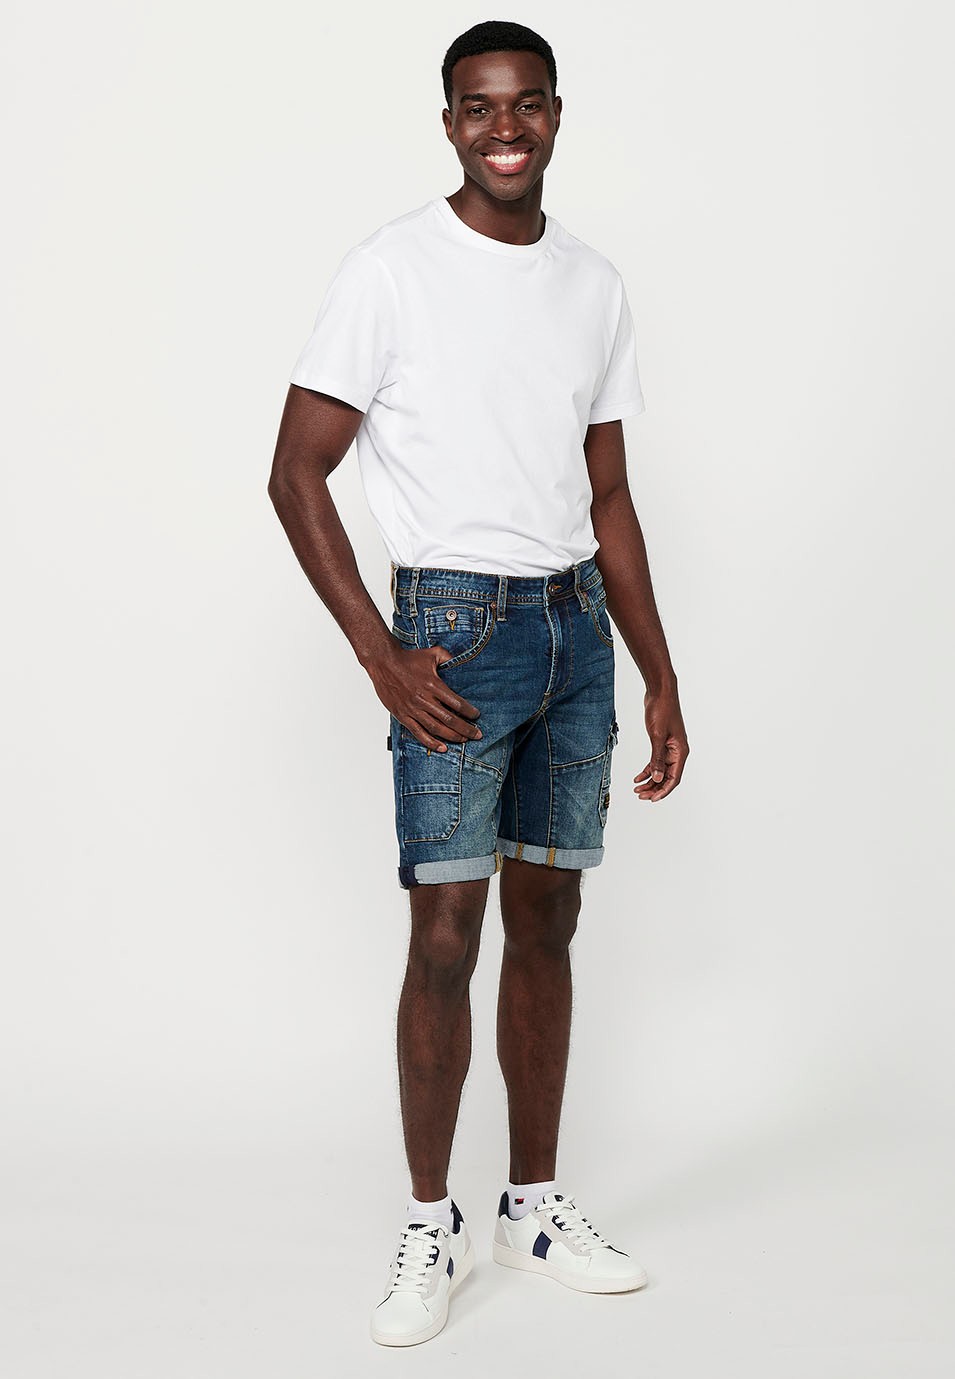 Denim Bermuda Shorts with Turn-Up Finish and Front Zipper and Button Closure with Five Pockets, One Pocket Pocket with Blue Front Details for Men